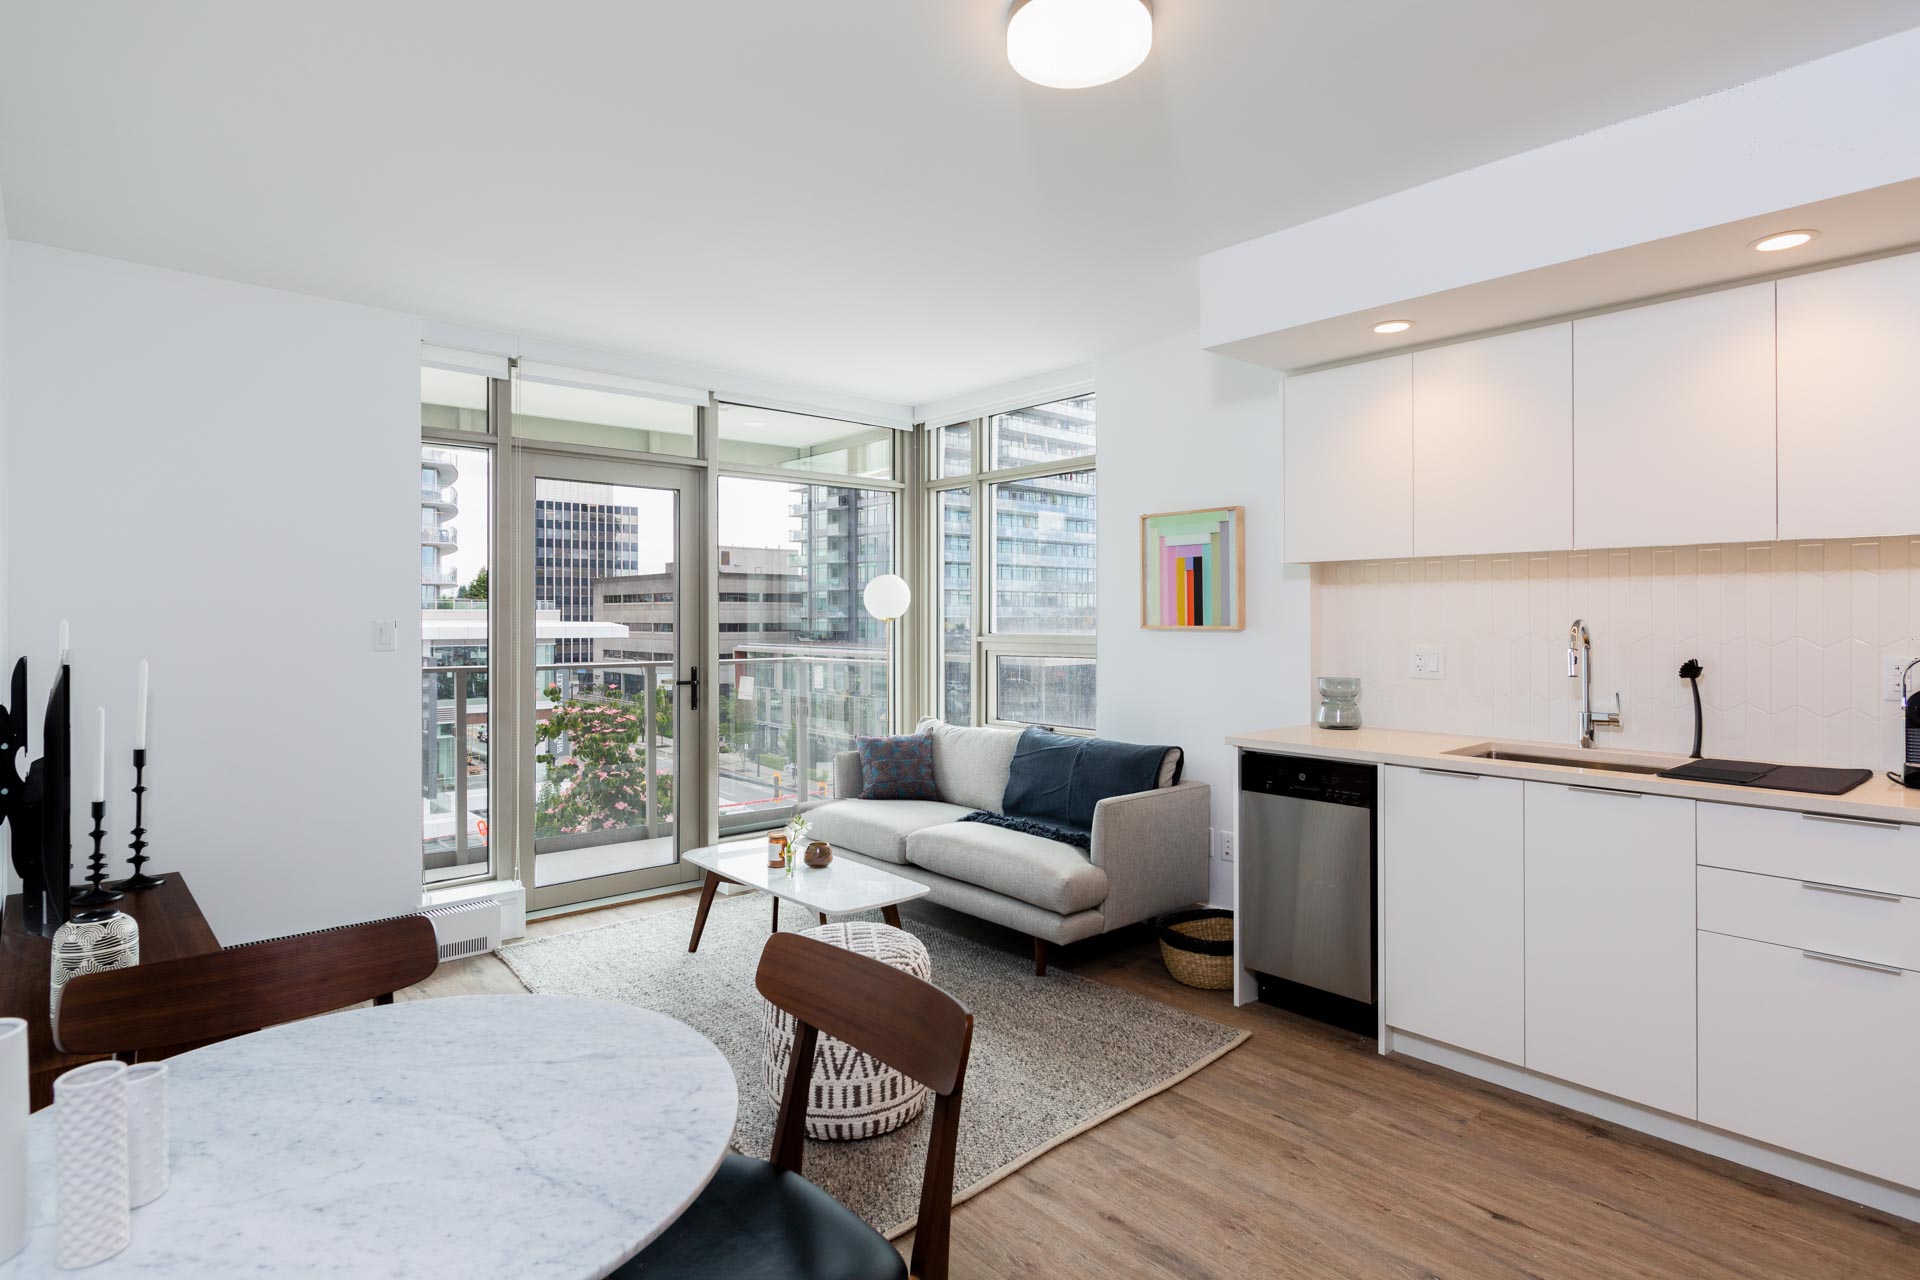 Unit #407 in The Lonsdale Rental Apartments